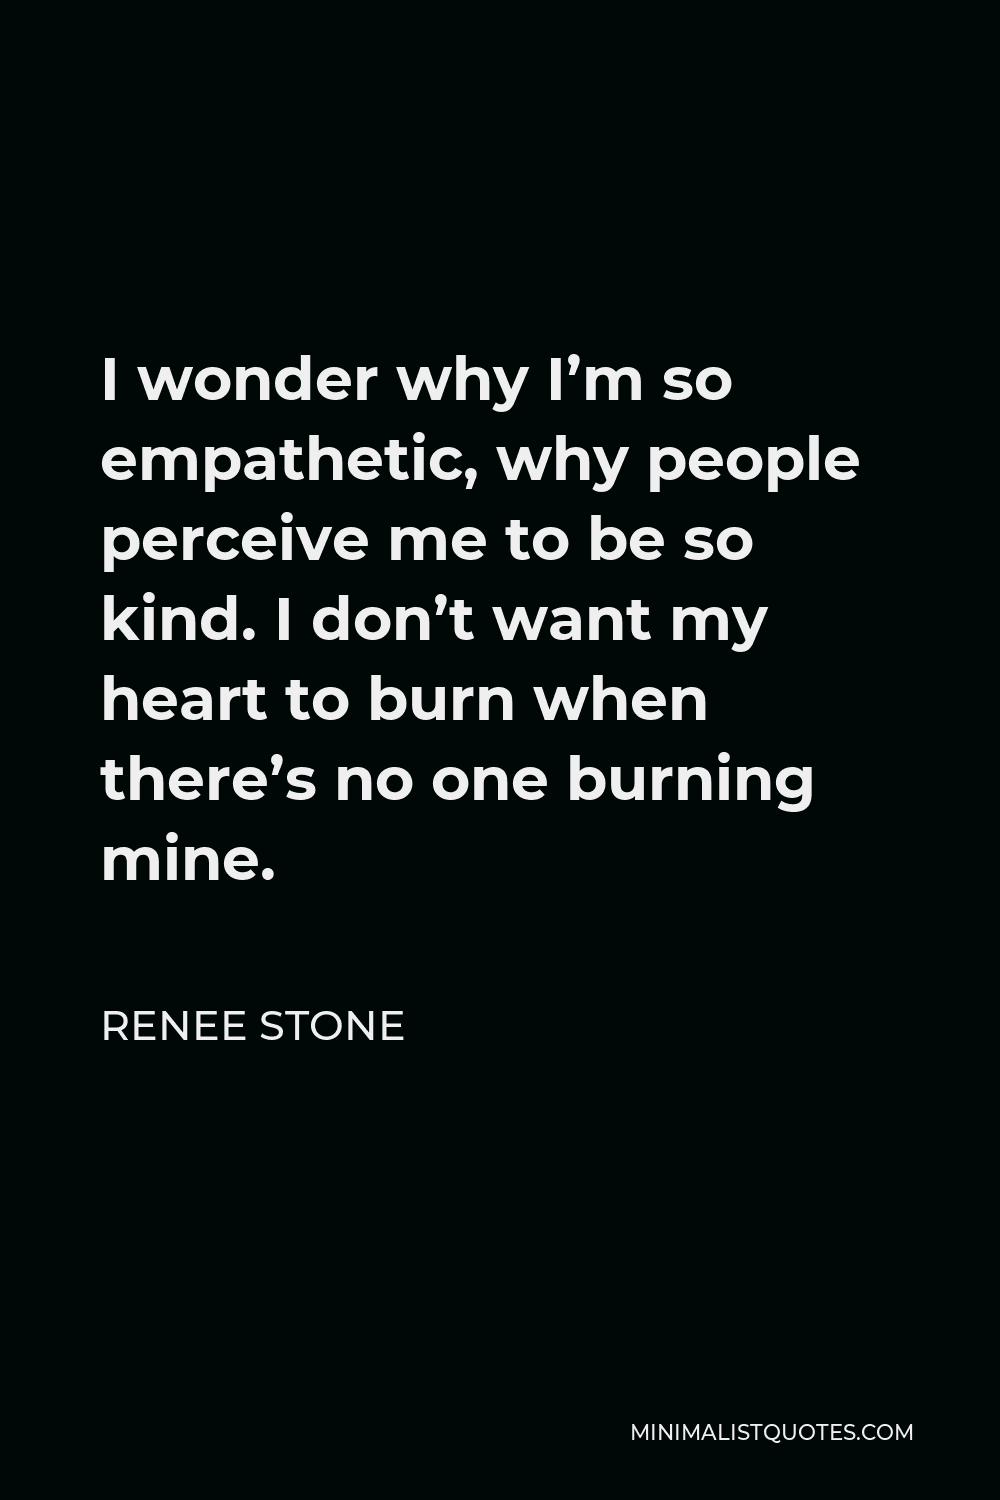 Renee Stone Quote - I wonder why I’m so empathetic, why people perceive me to be so kind. I don’t want my heart to burn when there’s no one burning mine.